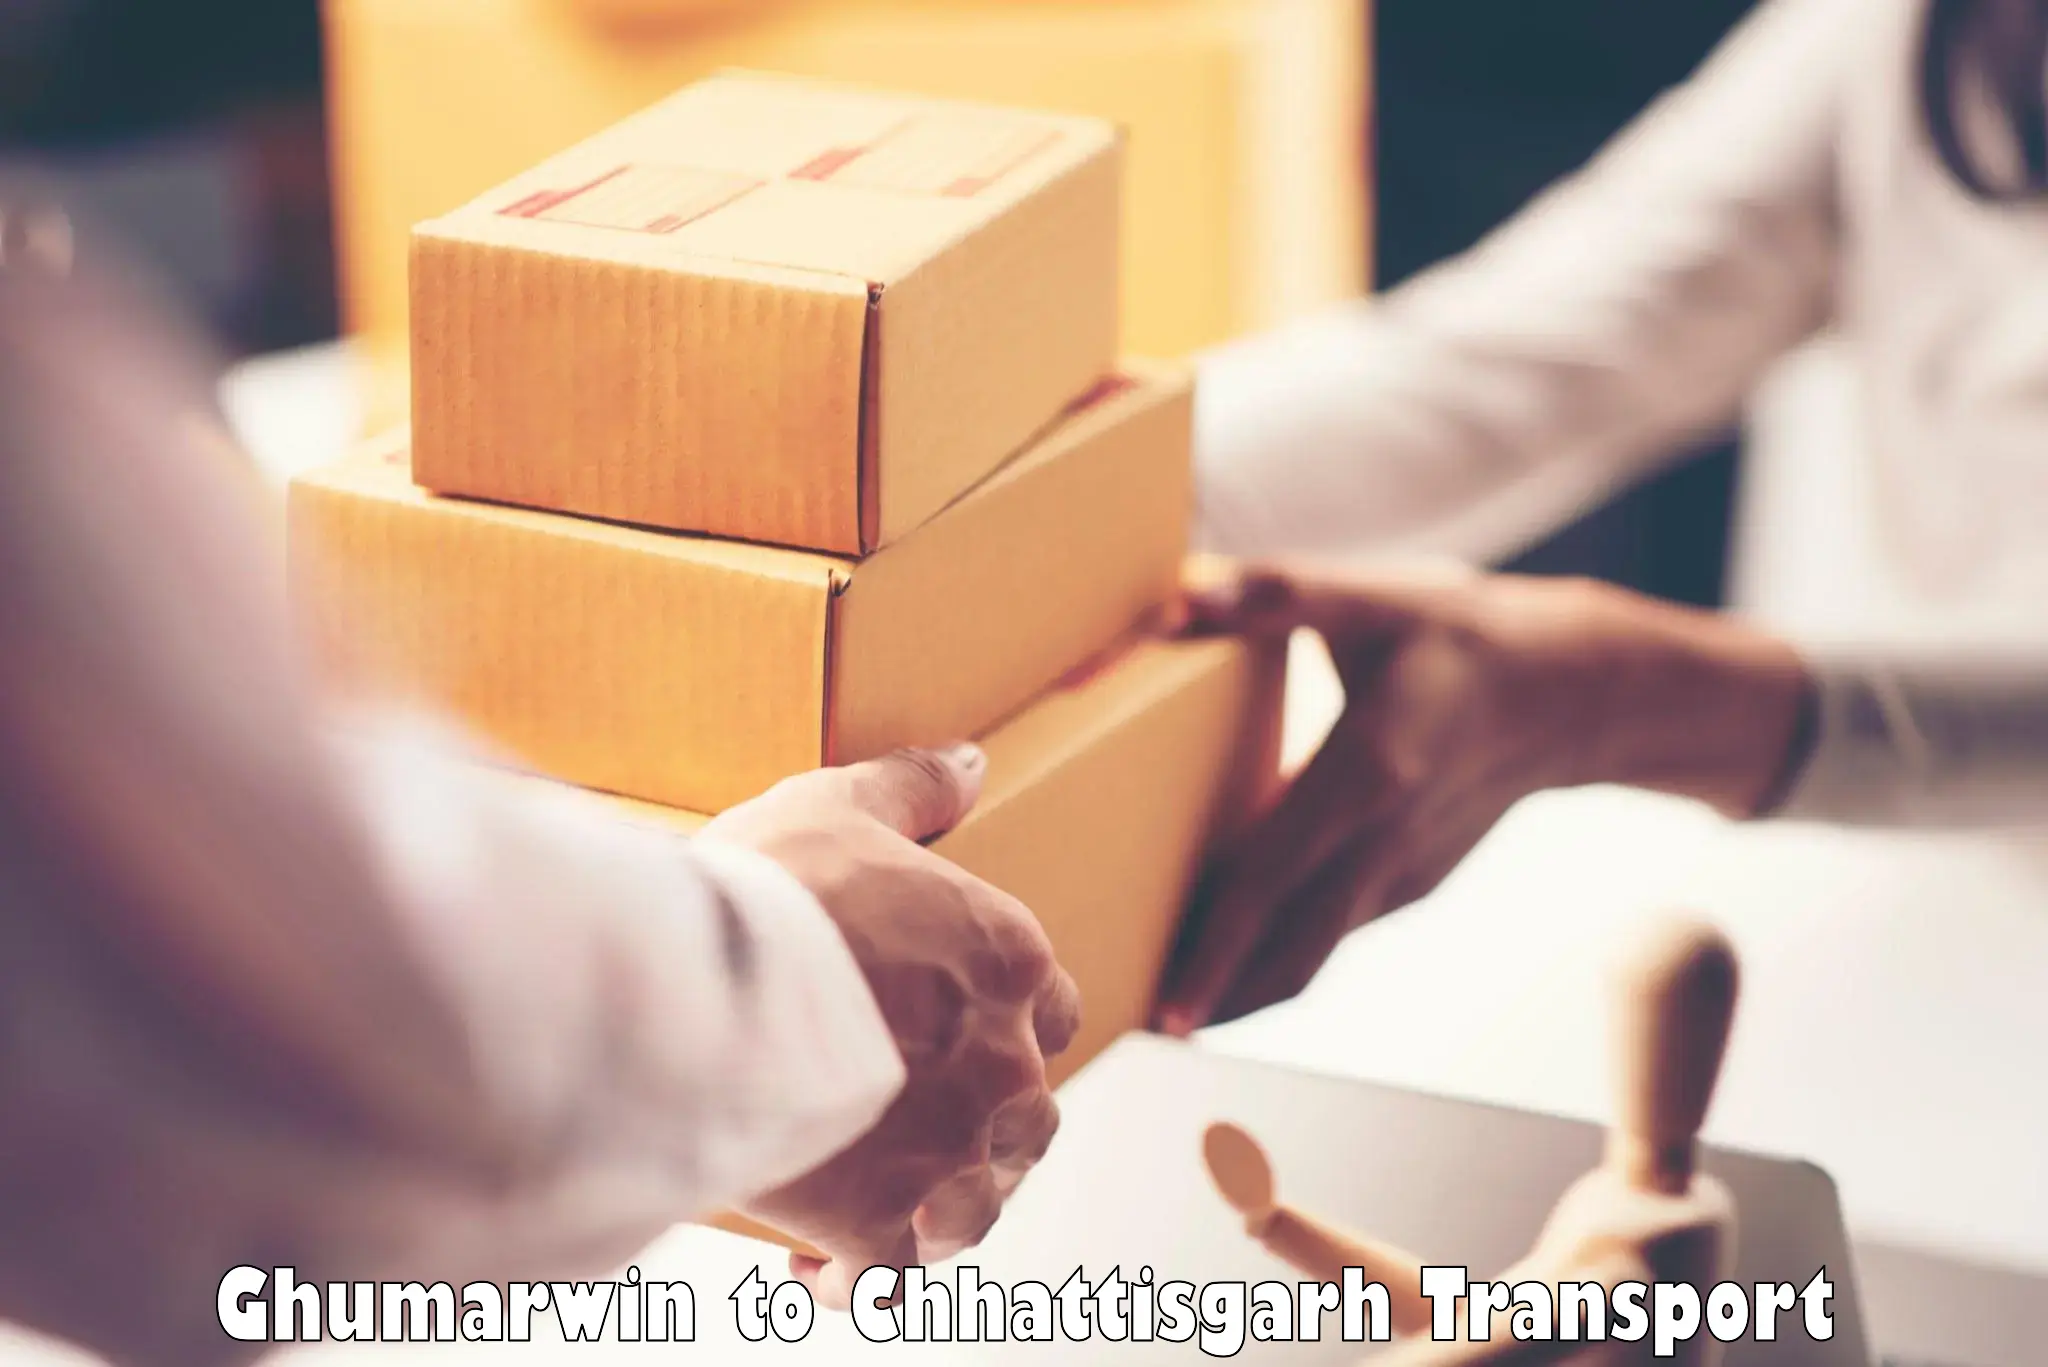 Domestic goods transportation services in Ghumarwin to Raipur